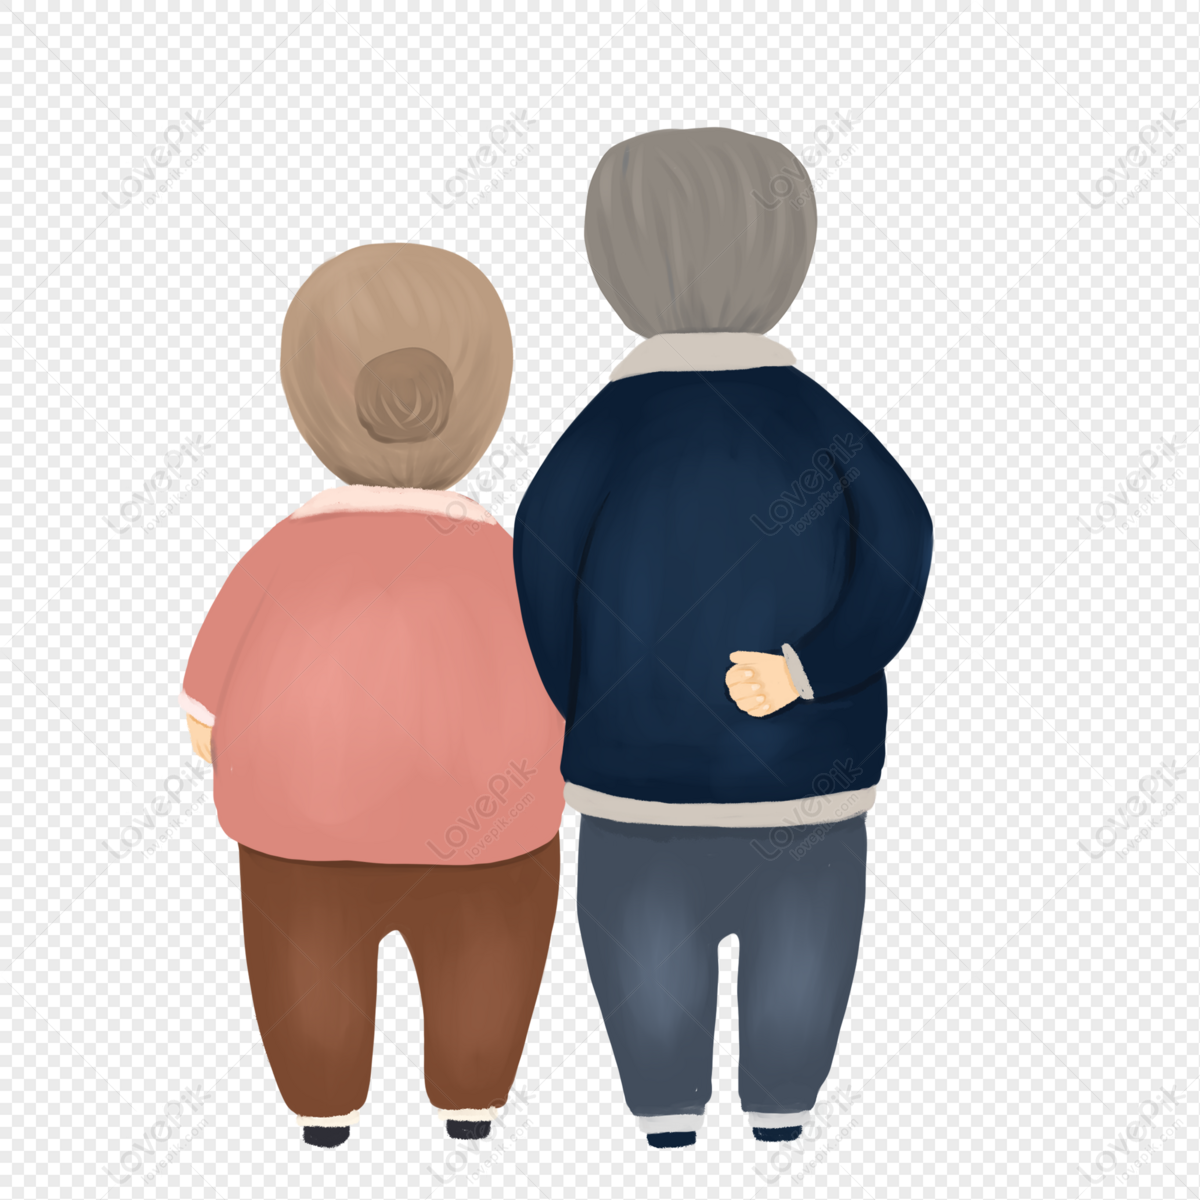 Elderly Couple PNG Image And Clipart Image For Free Download - Lovepik ...